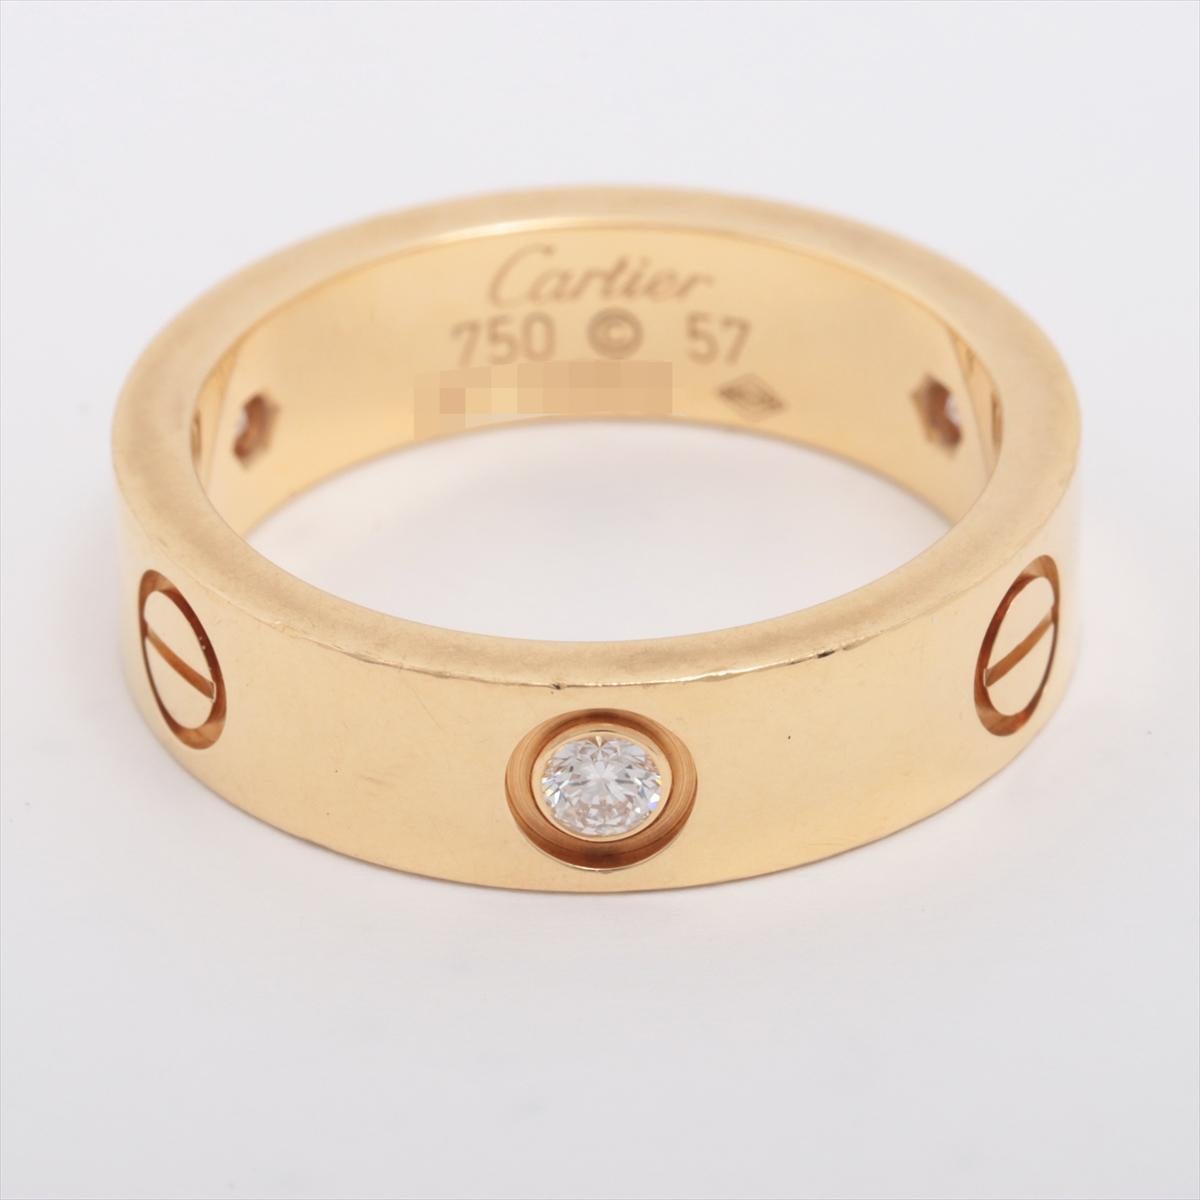 Brand : Cartier
Description: Cartier Love half Diamond rings 
Metal Type: 750YG/Yellow Gold
Weight 9.5g
Size 57
Condition: Preowned; small signs of wearing
Box -  Not Included
Papers - Included
